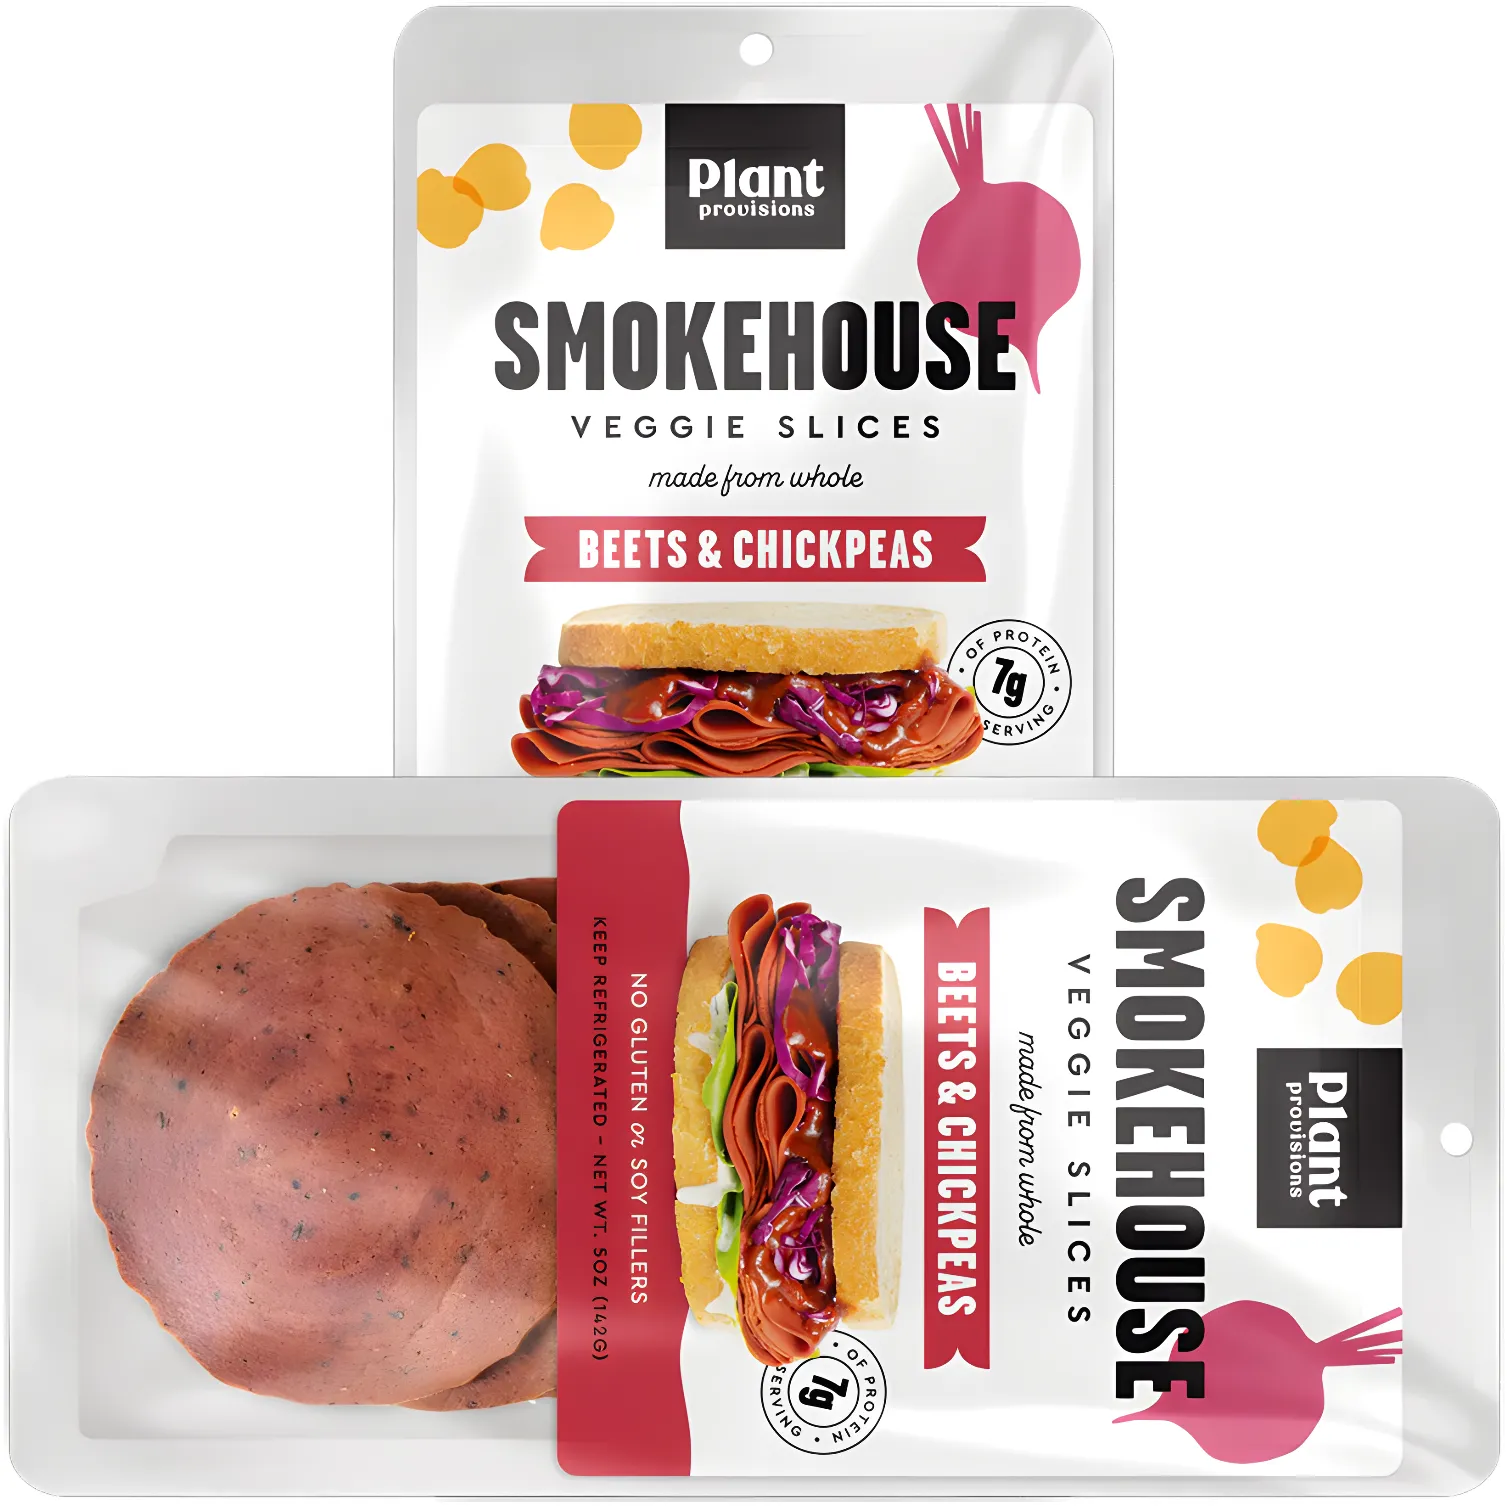 Free Plant Provisions Veggie Slices After Rebate